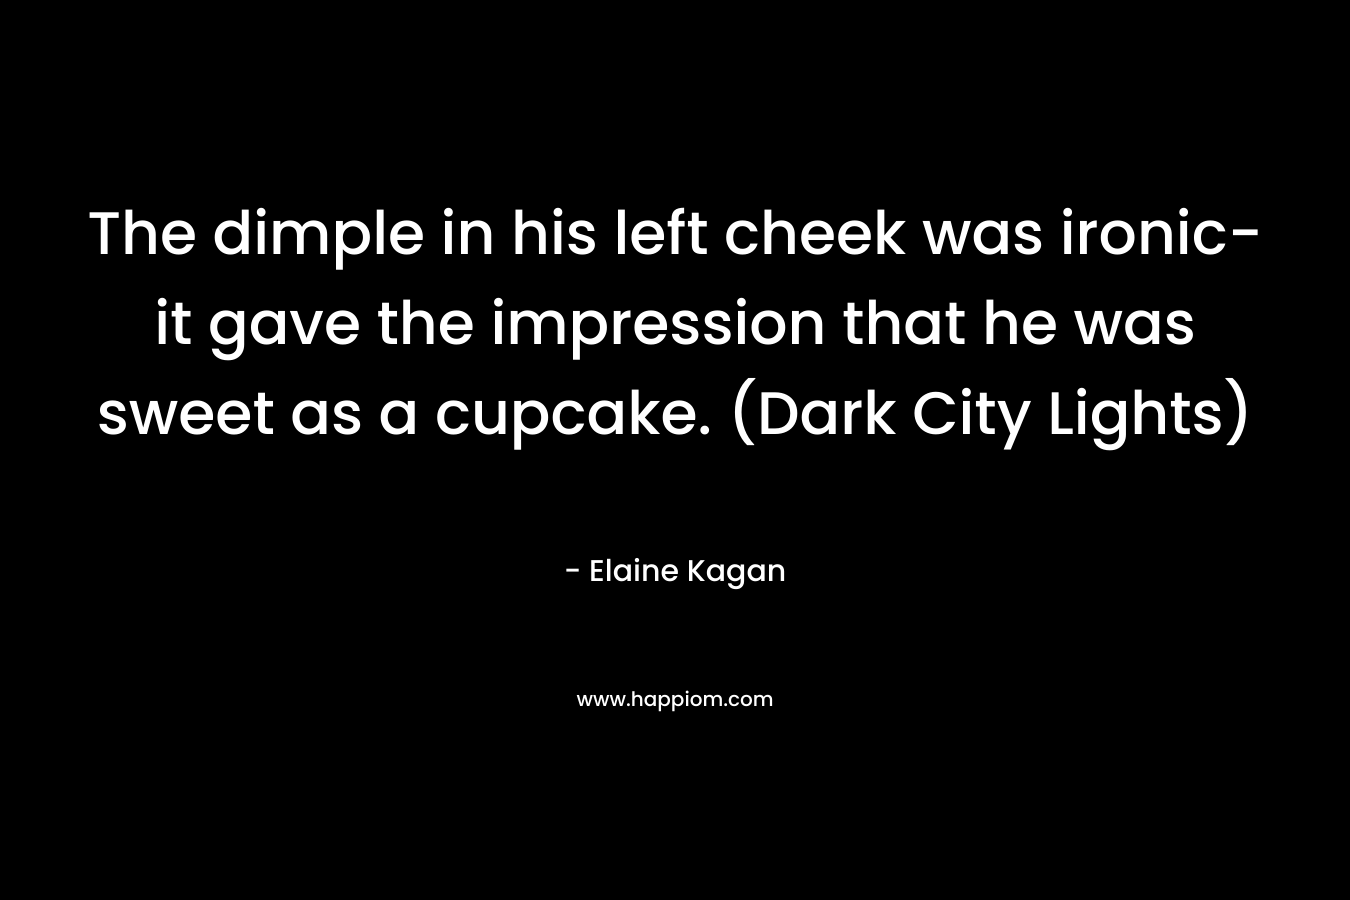 The dimple in his left cheek was ironic-it gave the impression that he was sweet as a cupcake. (Dark City Lights) – Elaine Kagan